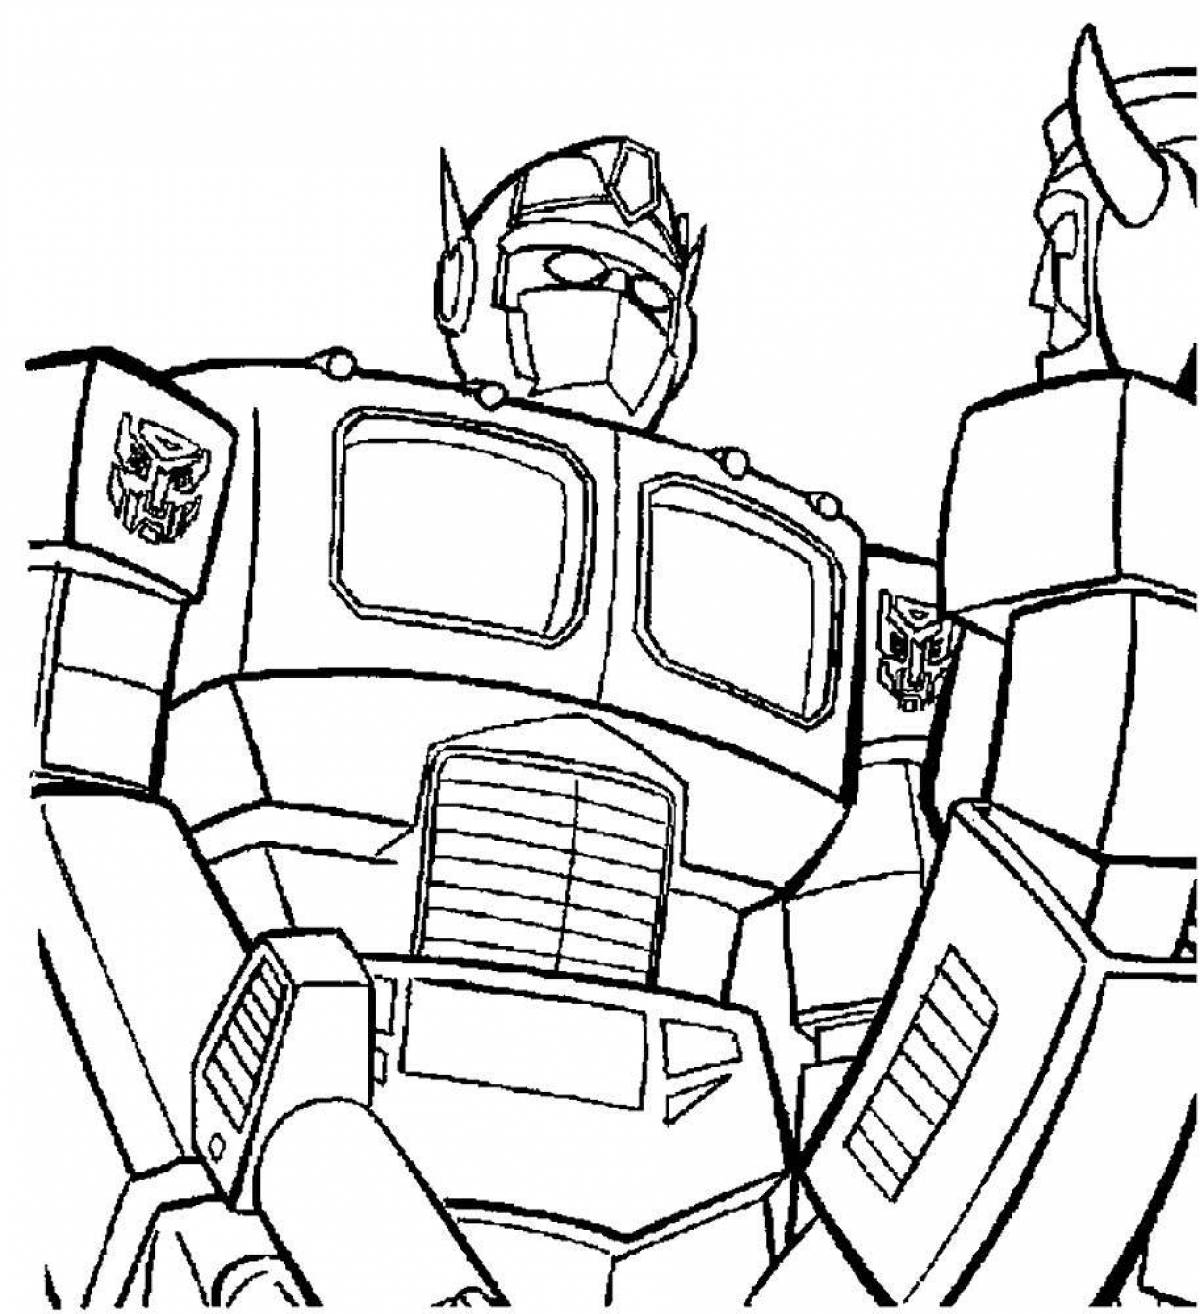 Royal optimus prime coloring page for kids